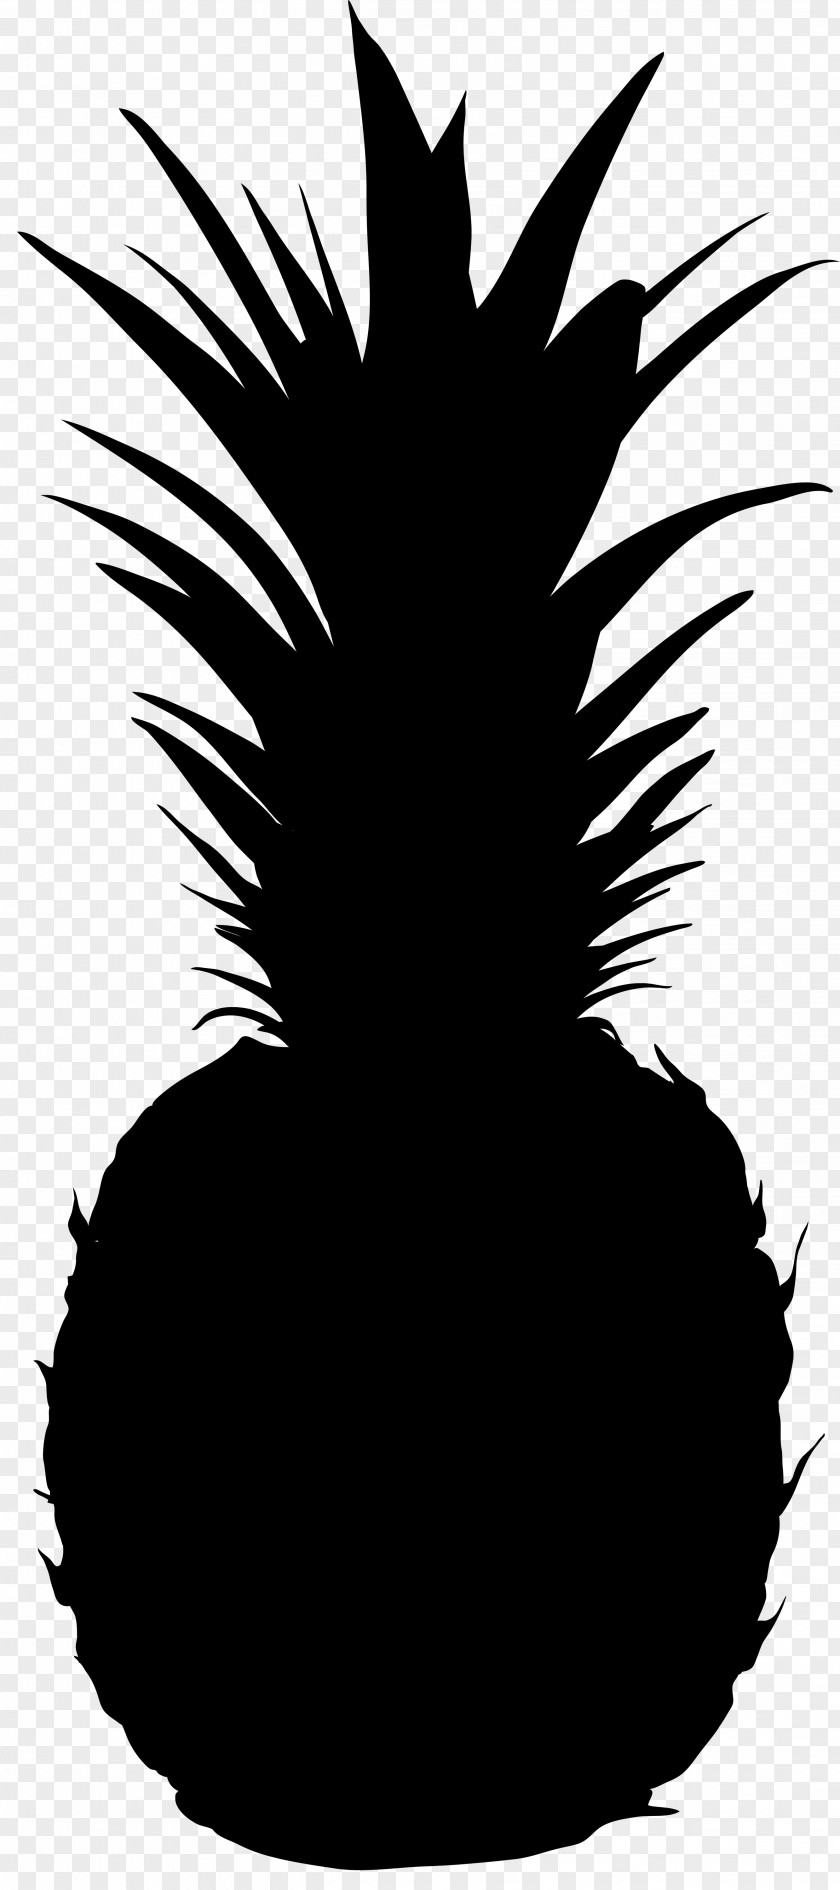 Clip Art Vector Graphics Silhouette Pineapple Illustration PNG